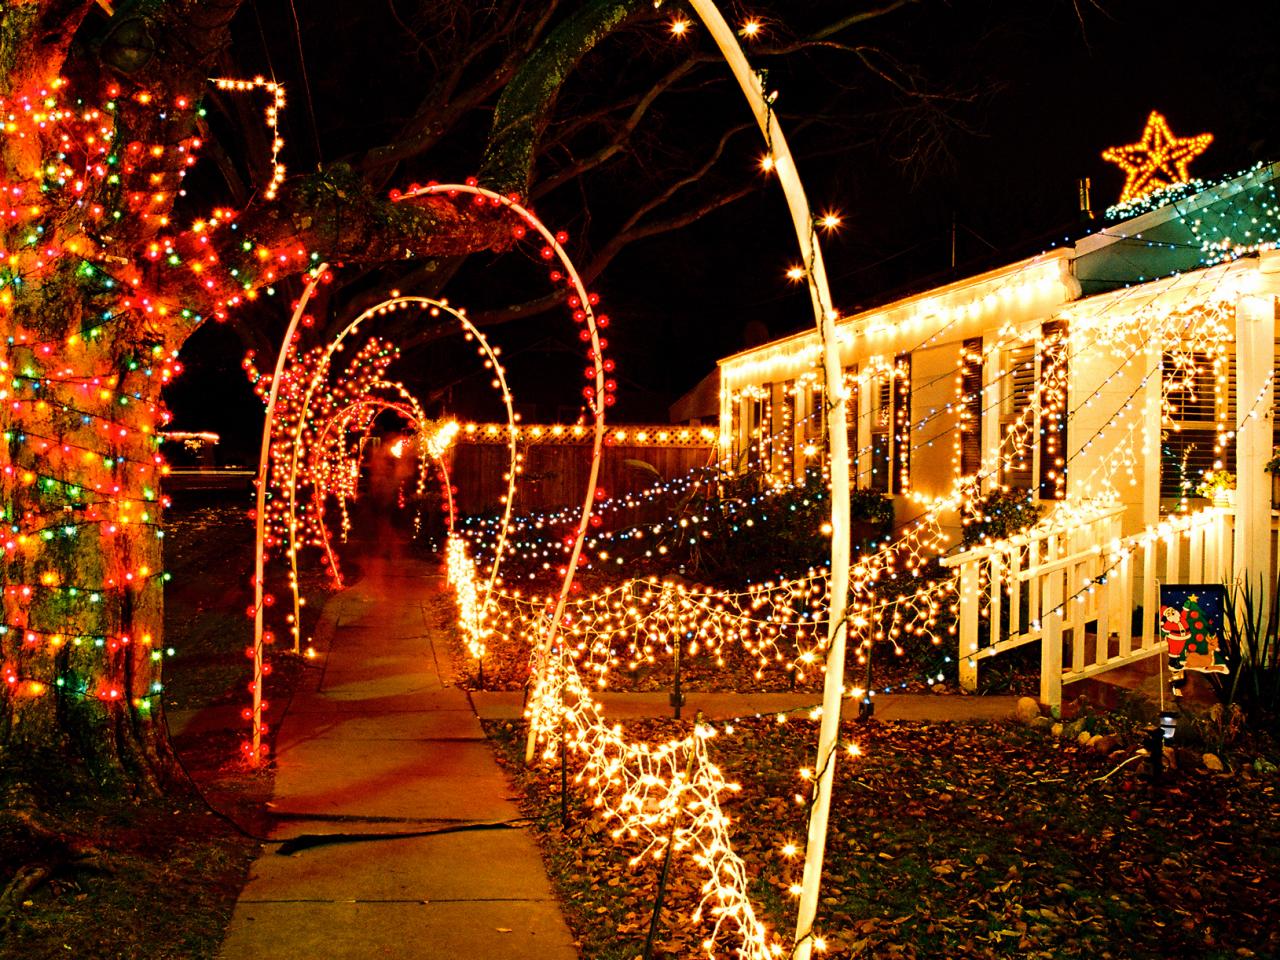 Buyers Guide For The Best Outdoor Christmas Lighting Diy with regard to xmas house lights regarding Your own home